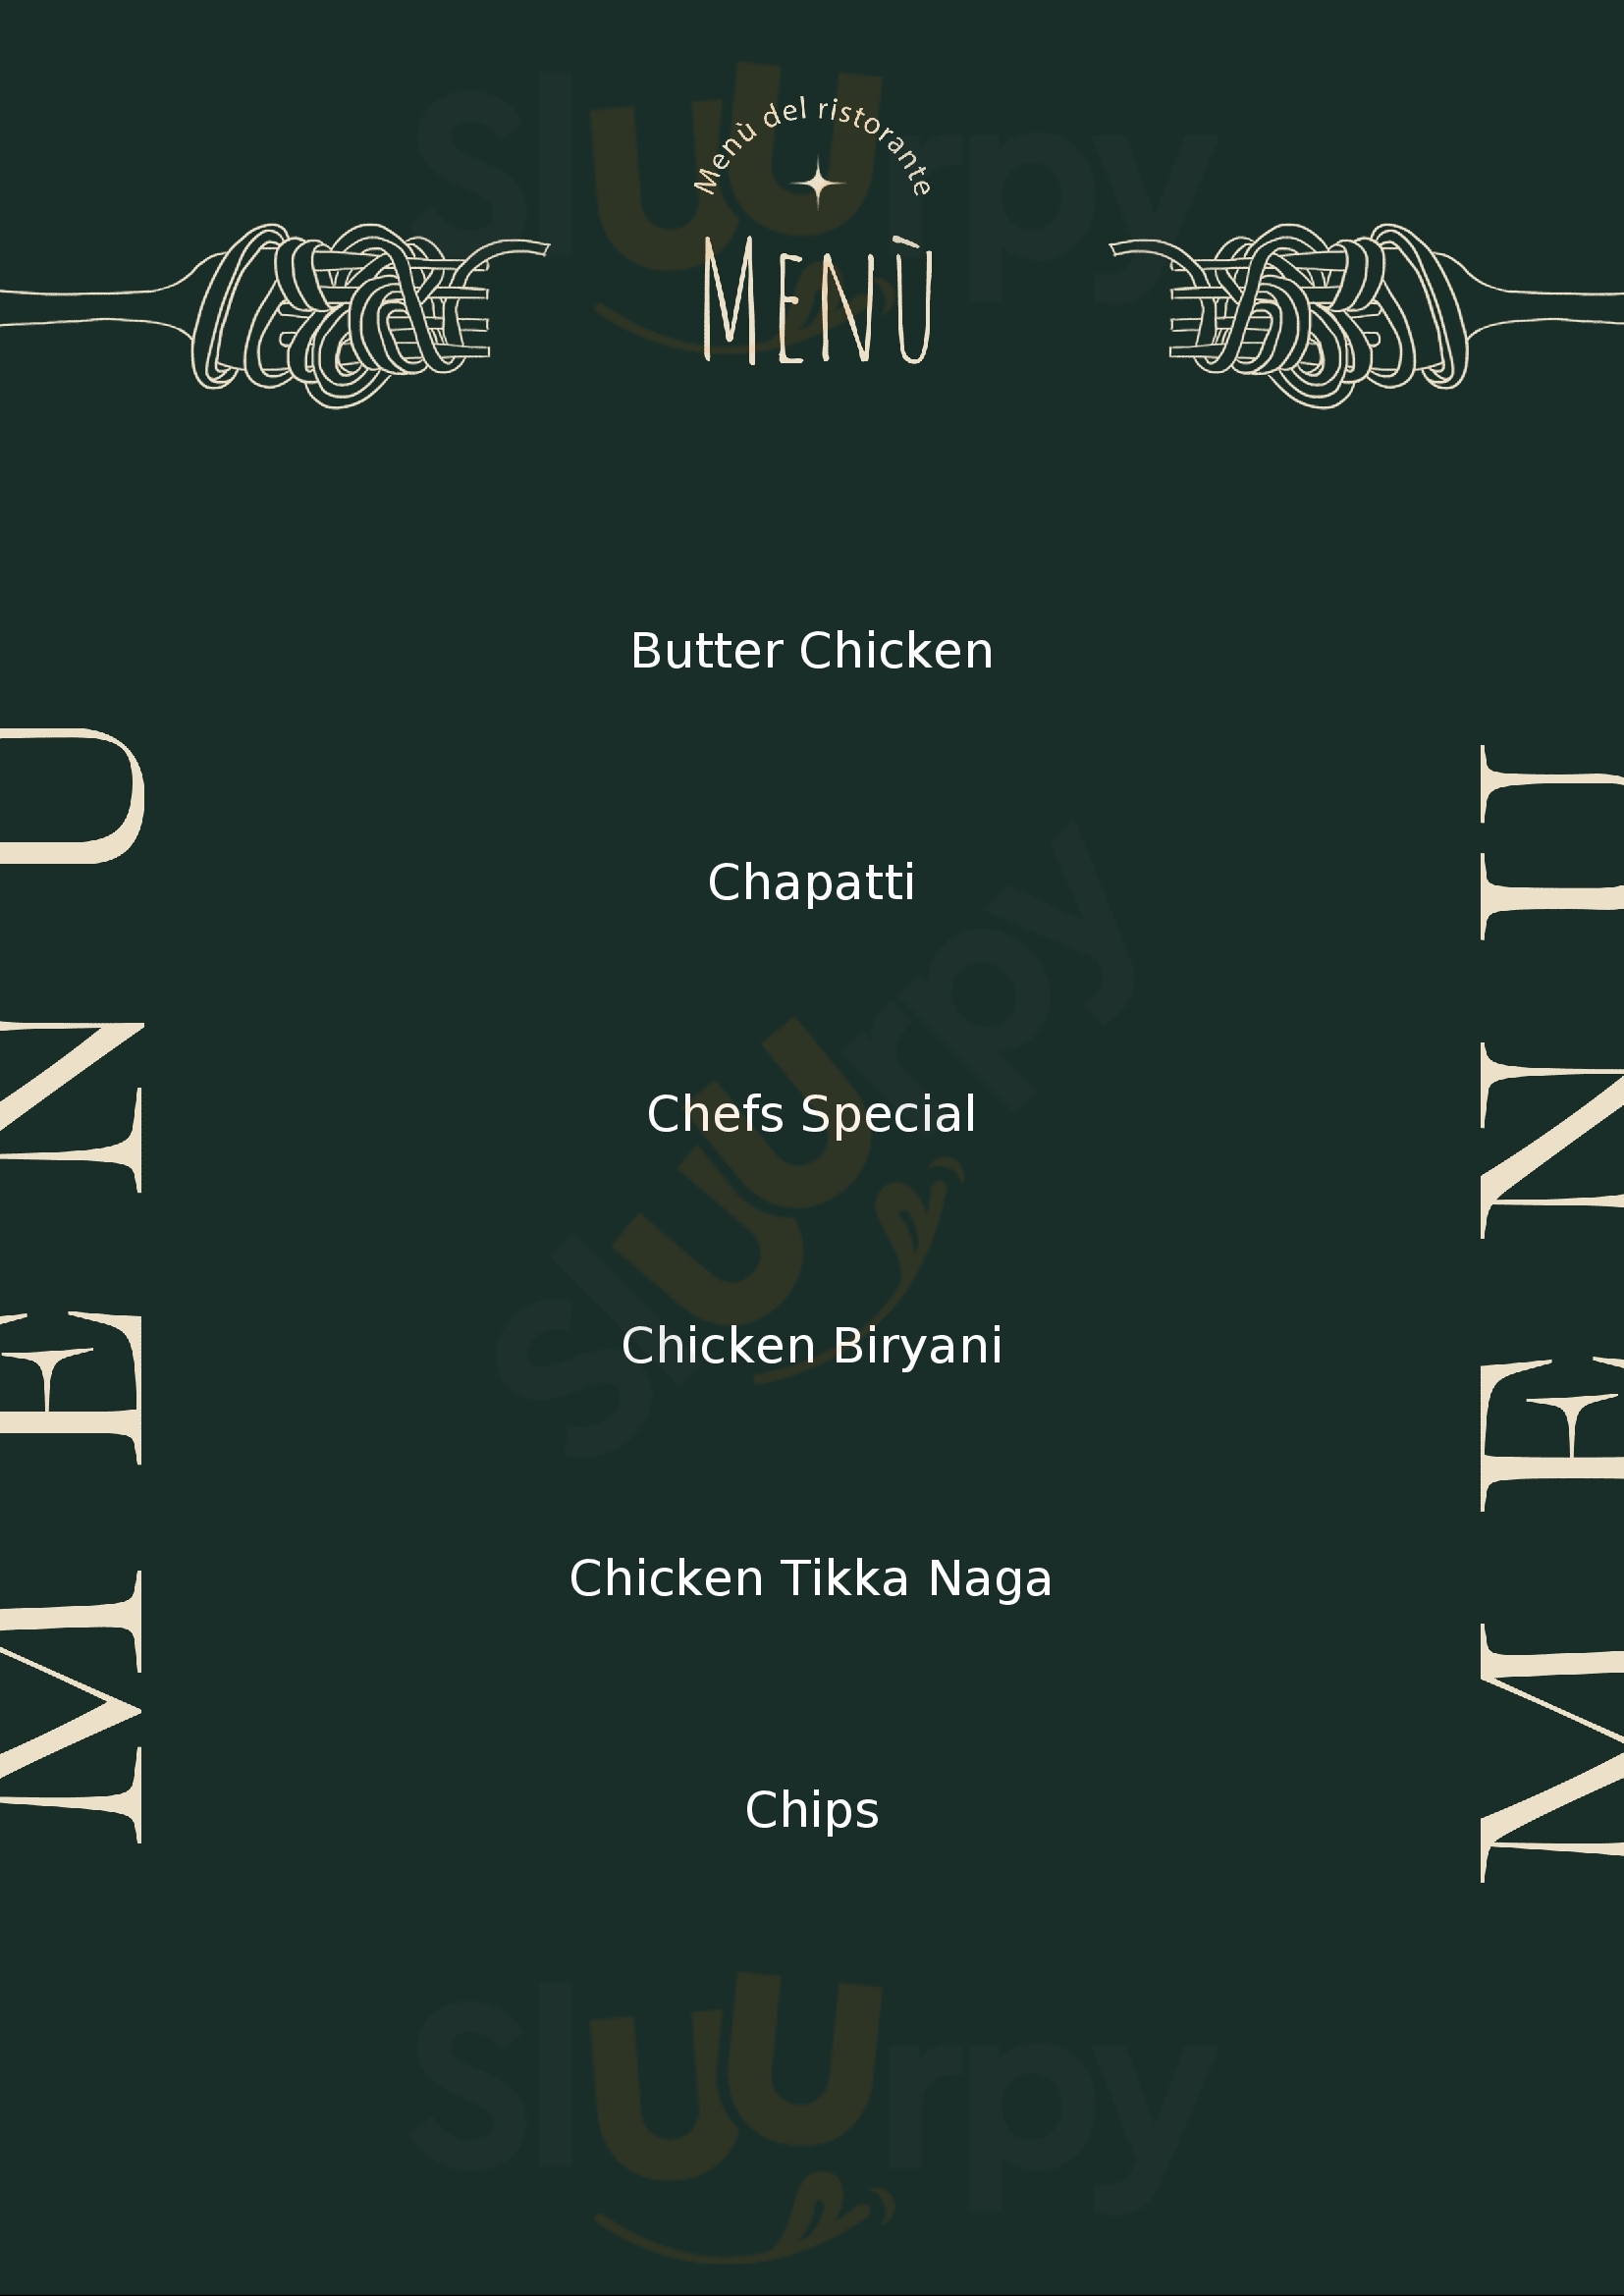 Balti Mahal The Royal Town of Sutton Coldfield Menu - 1